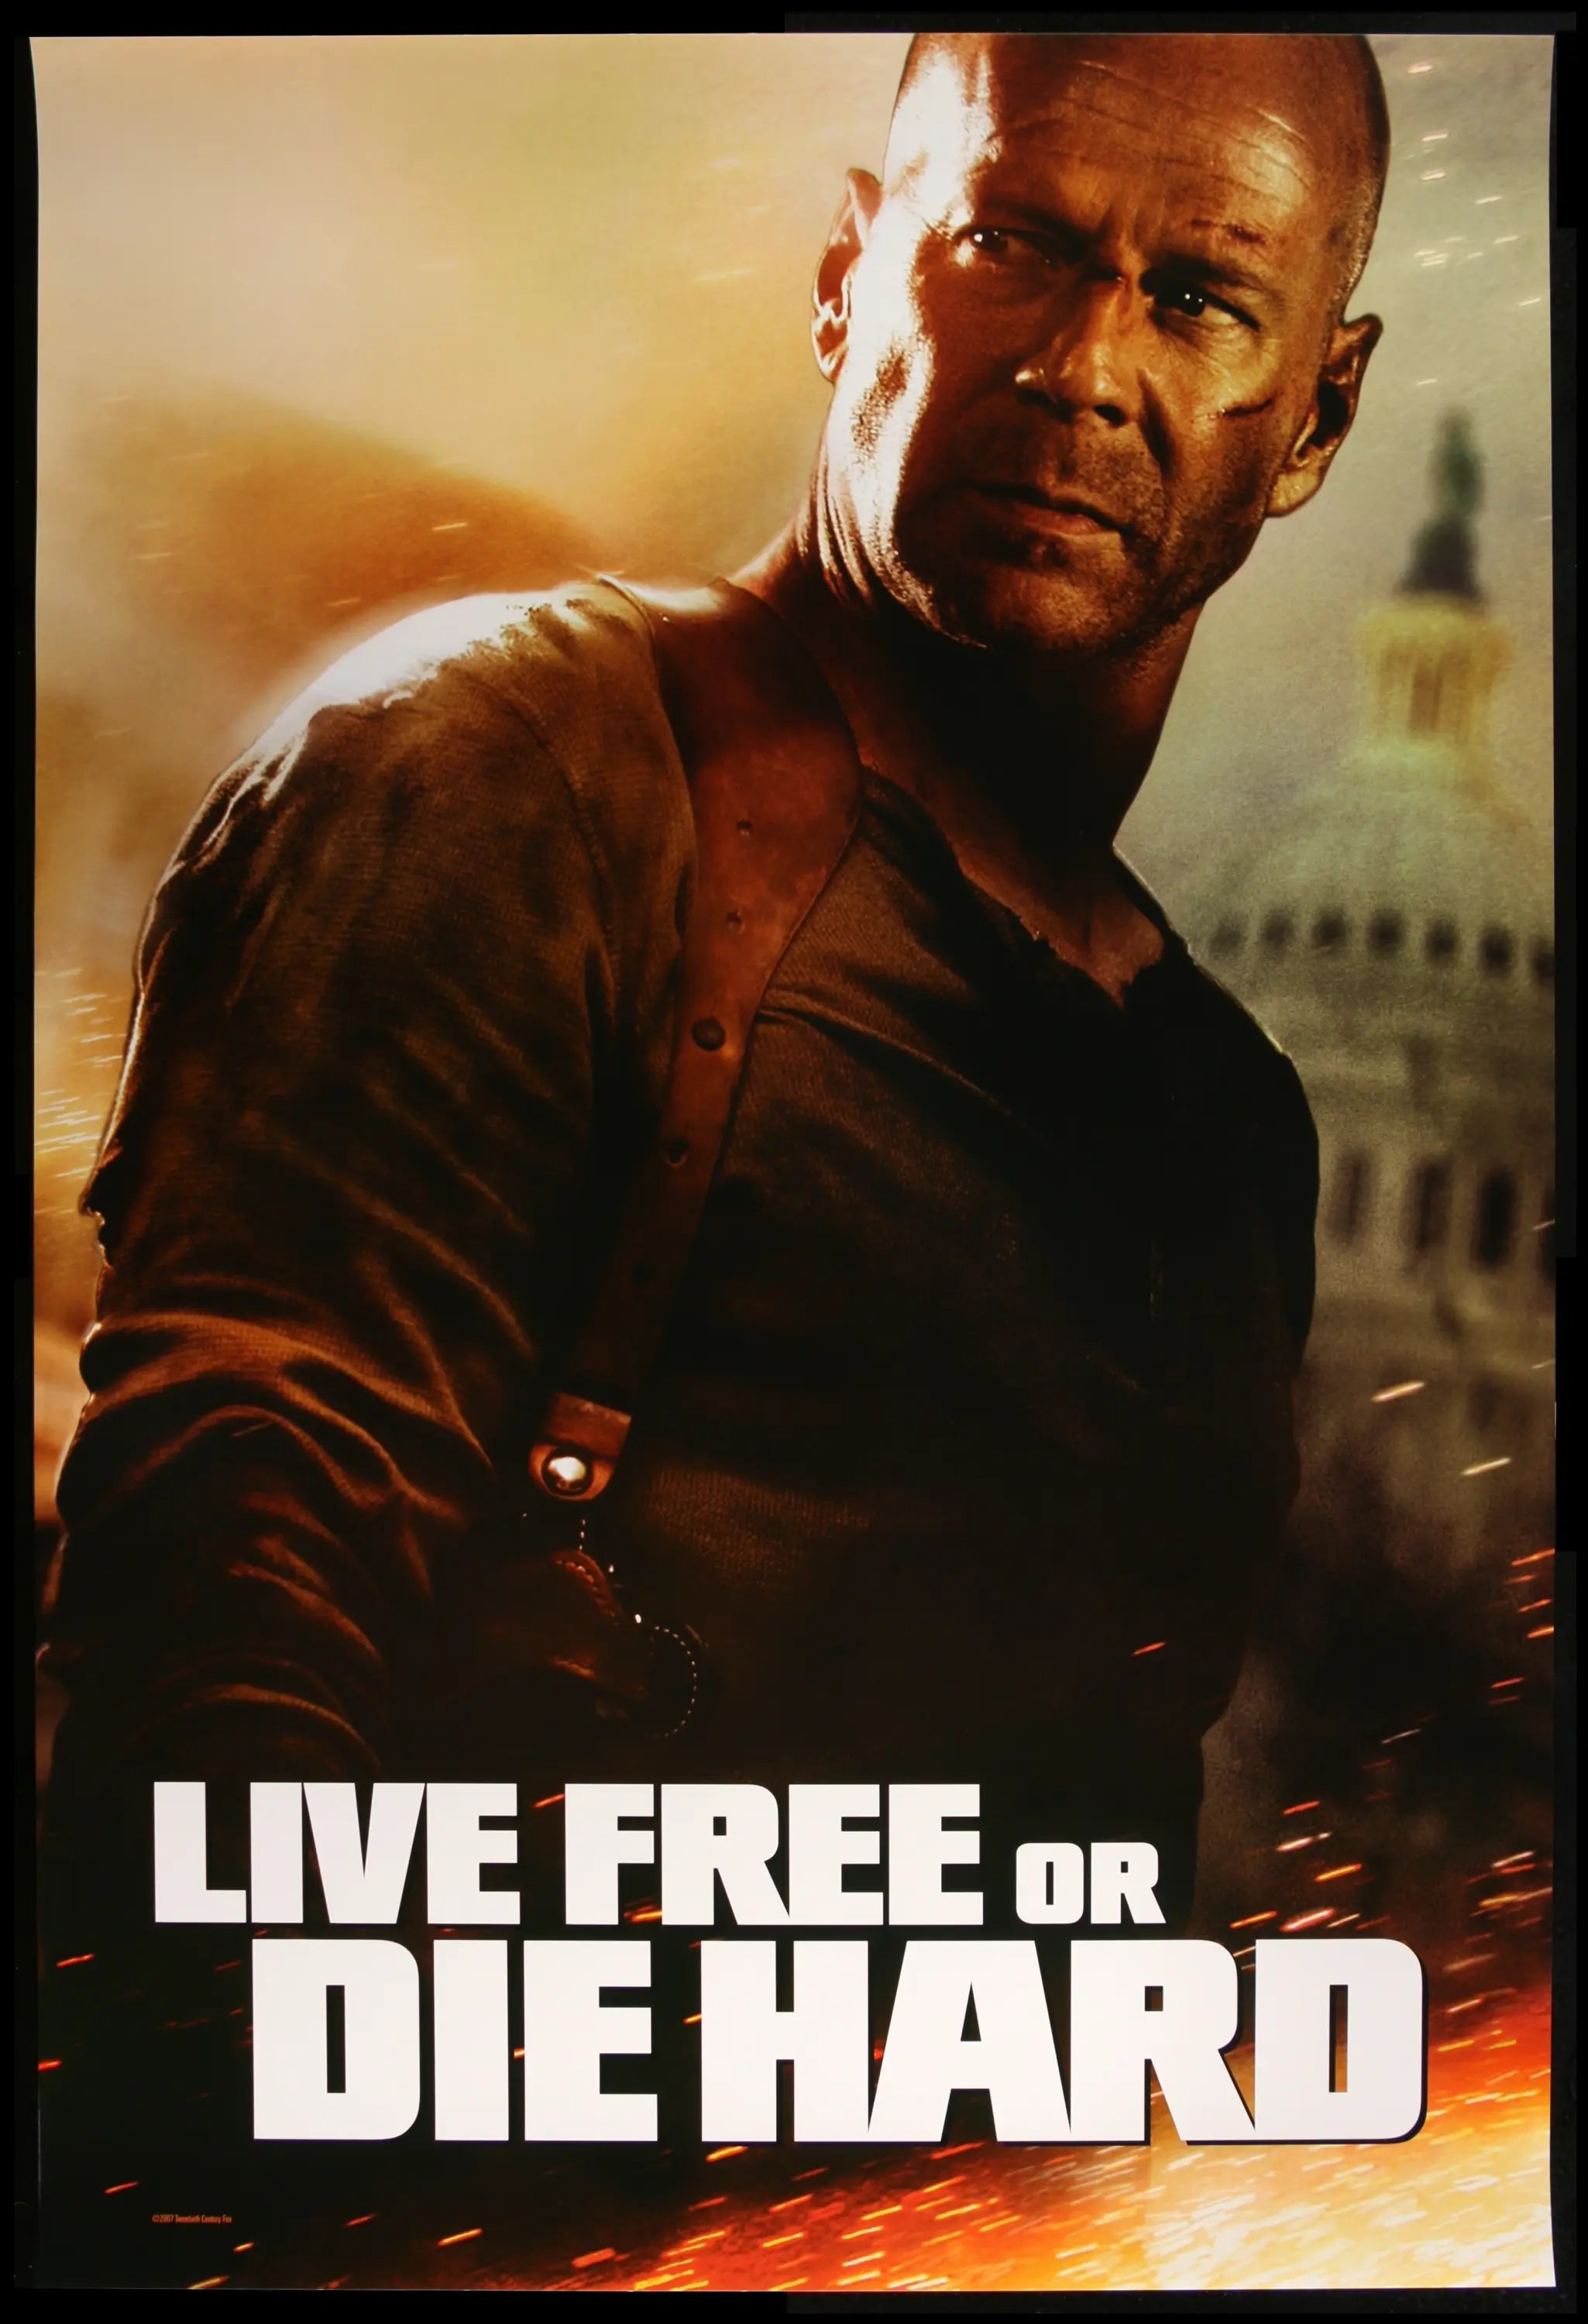 free hd movie posters